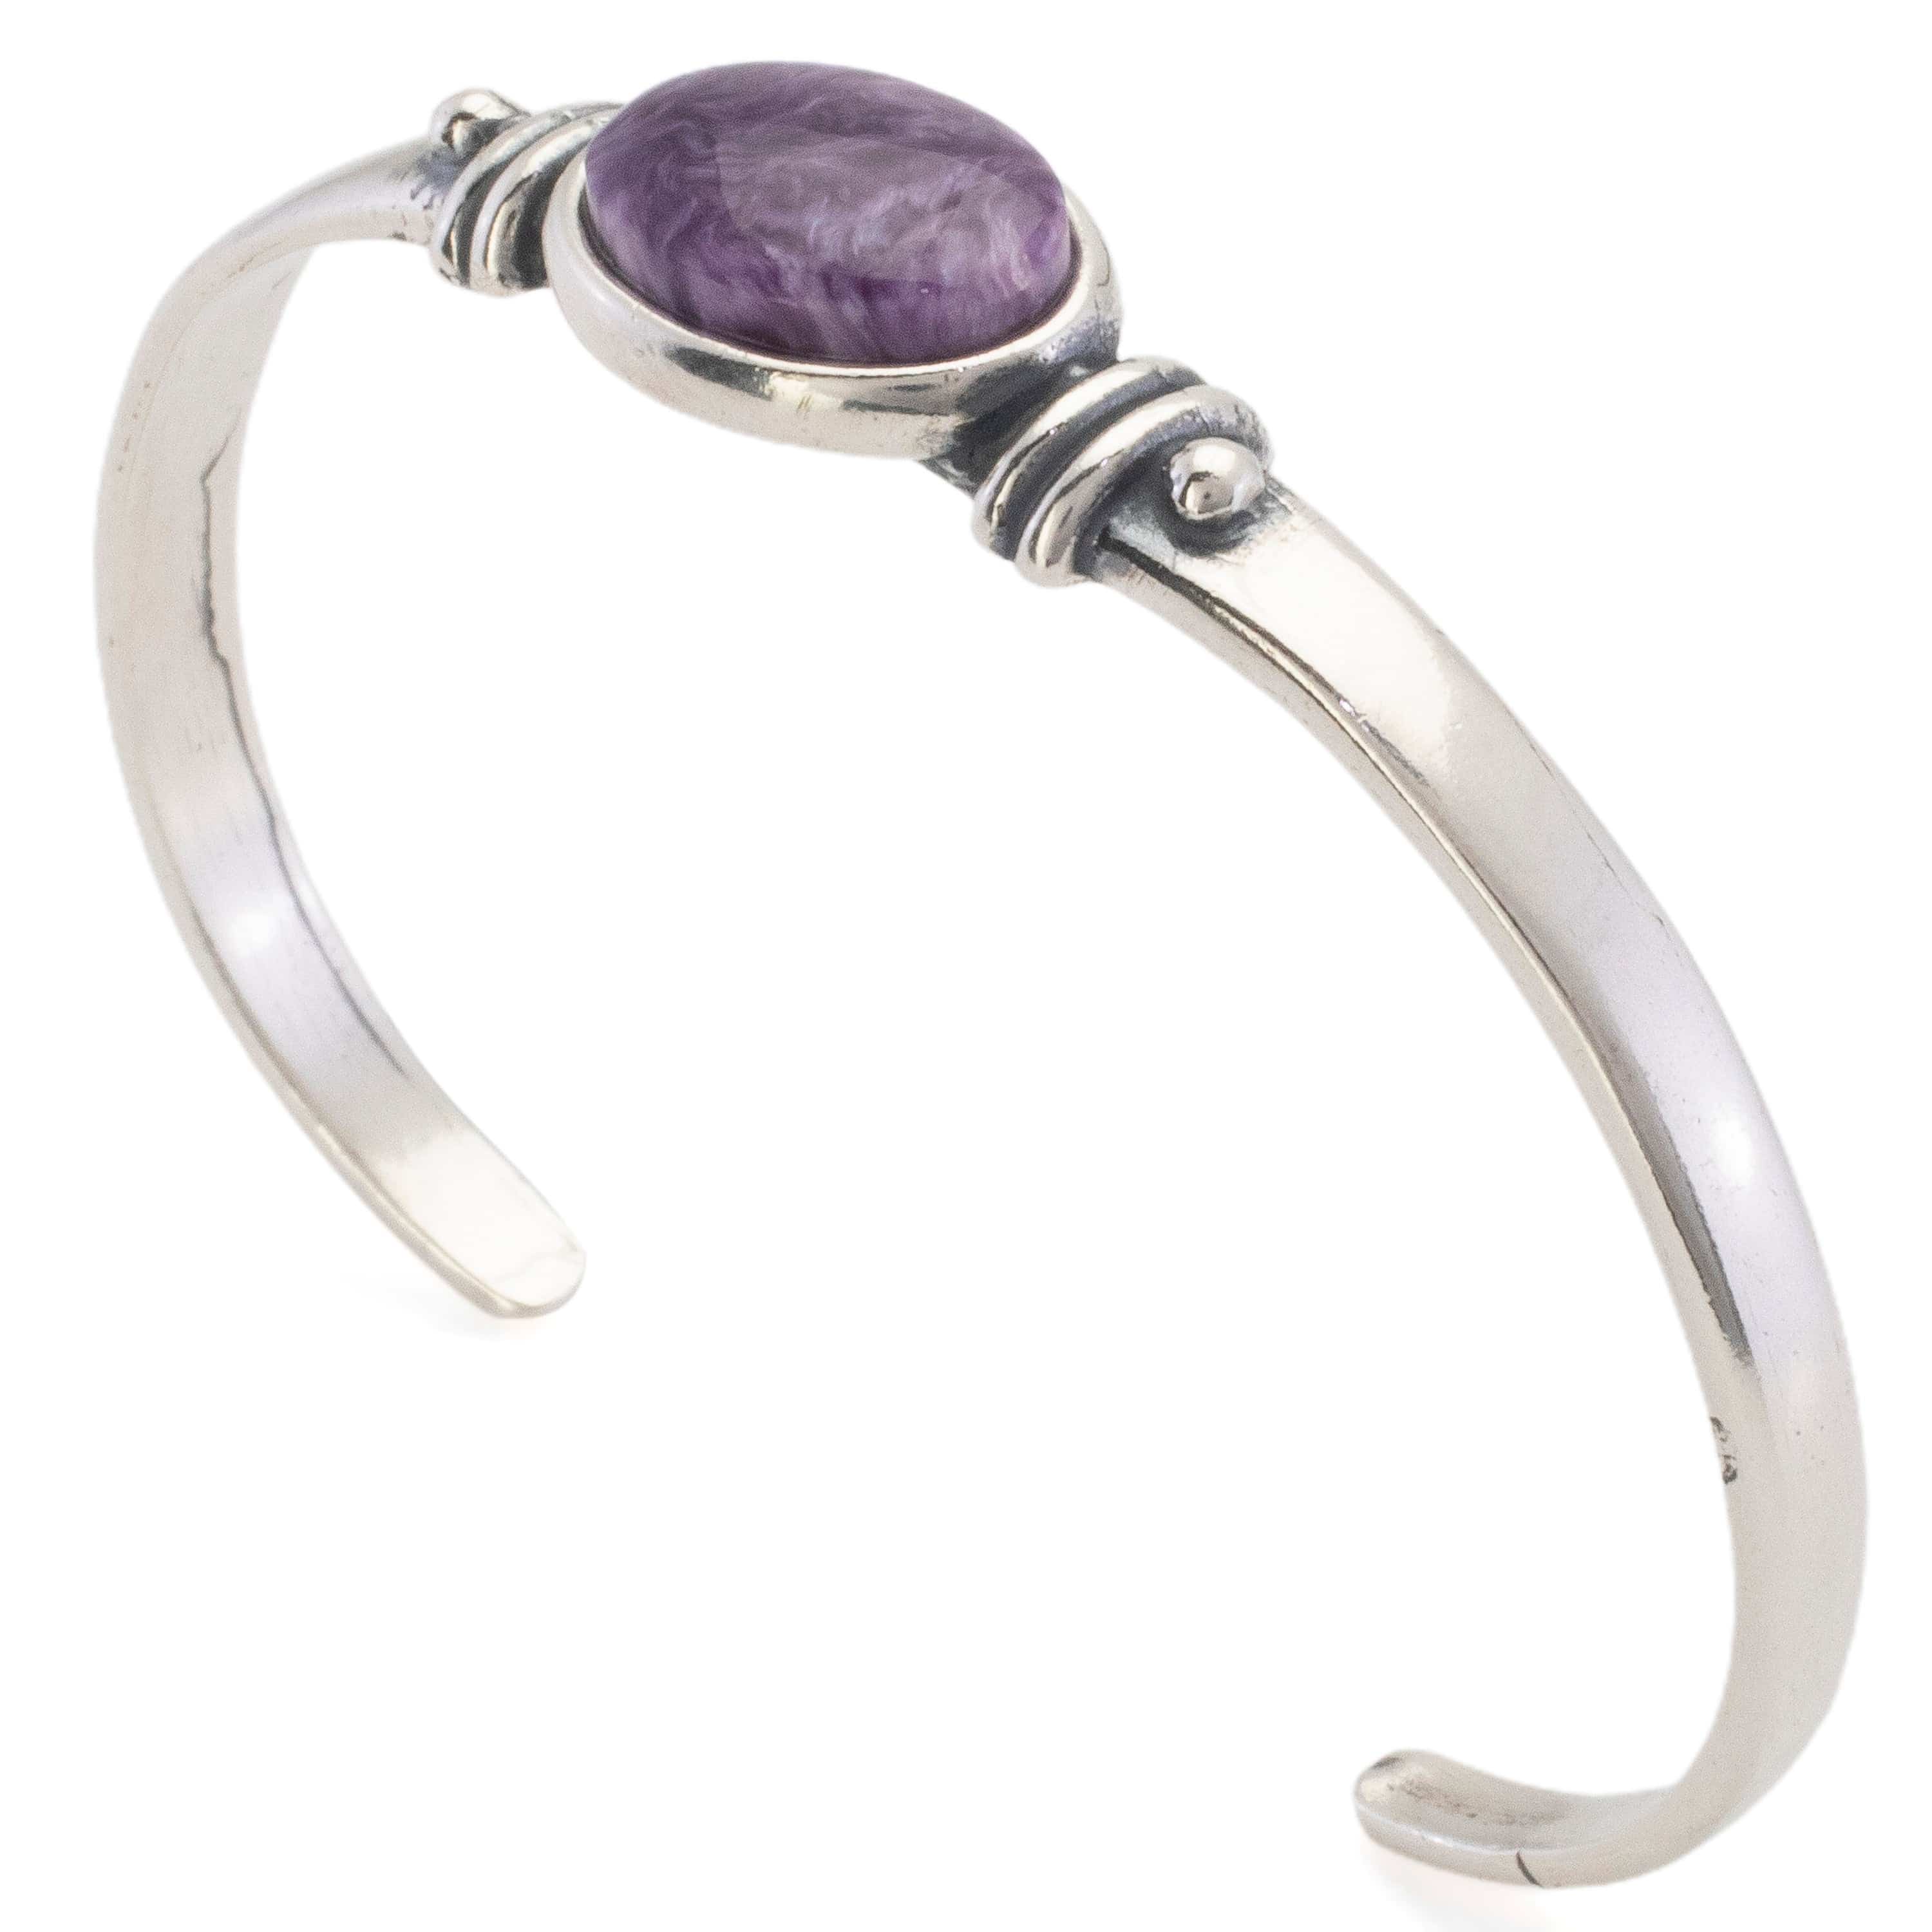 Kalifano Southwest Silver Jewelry Oval Charoite USA Handmade 925 Sterling Silver Cuff NMB350.001